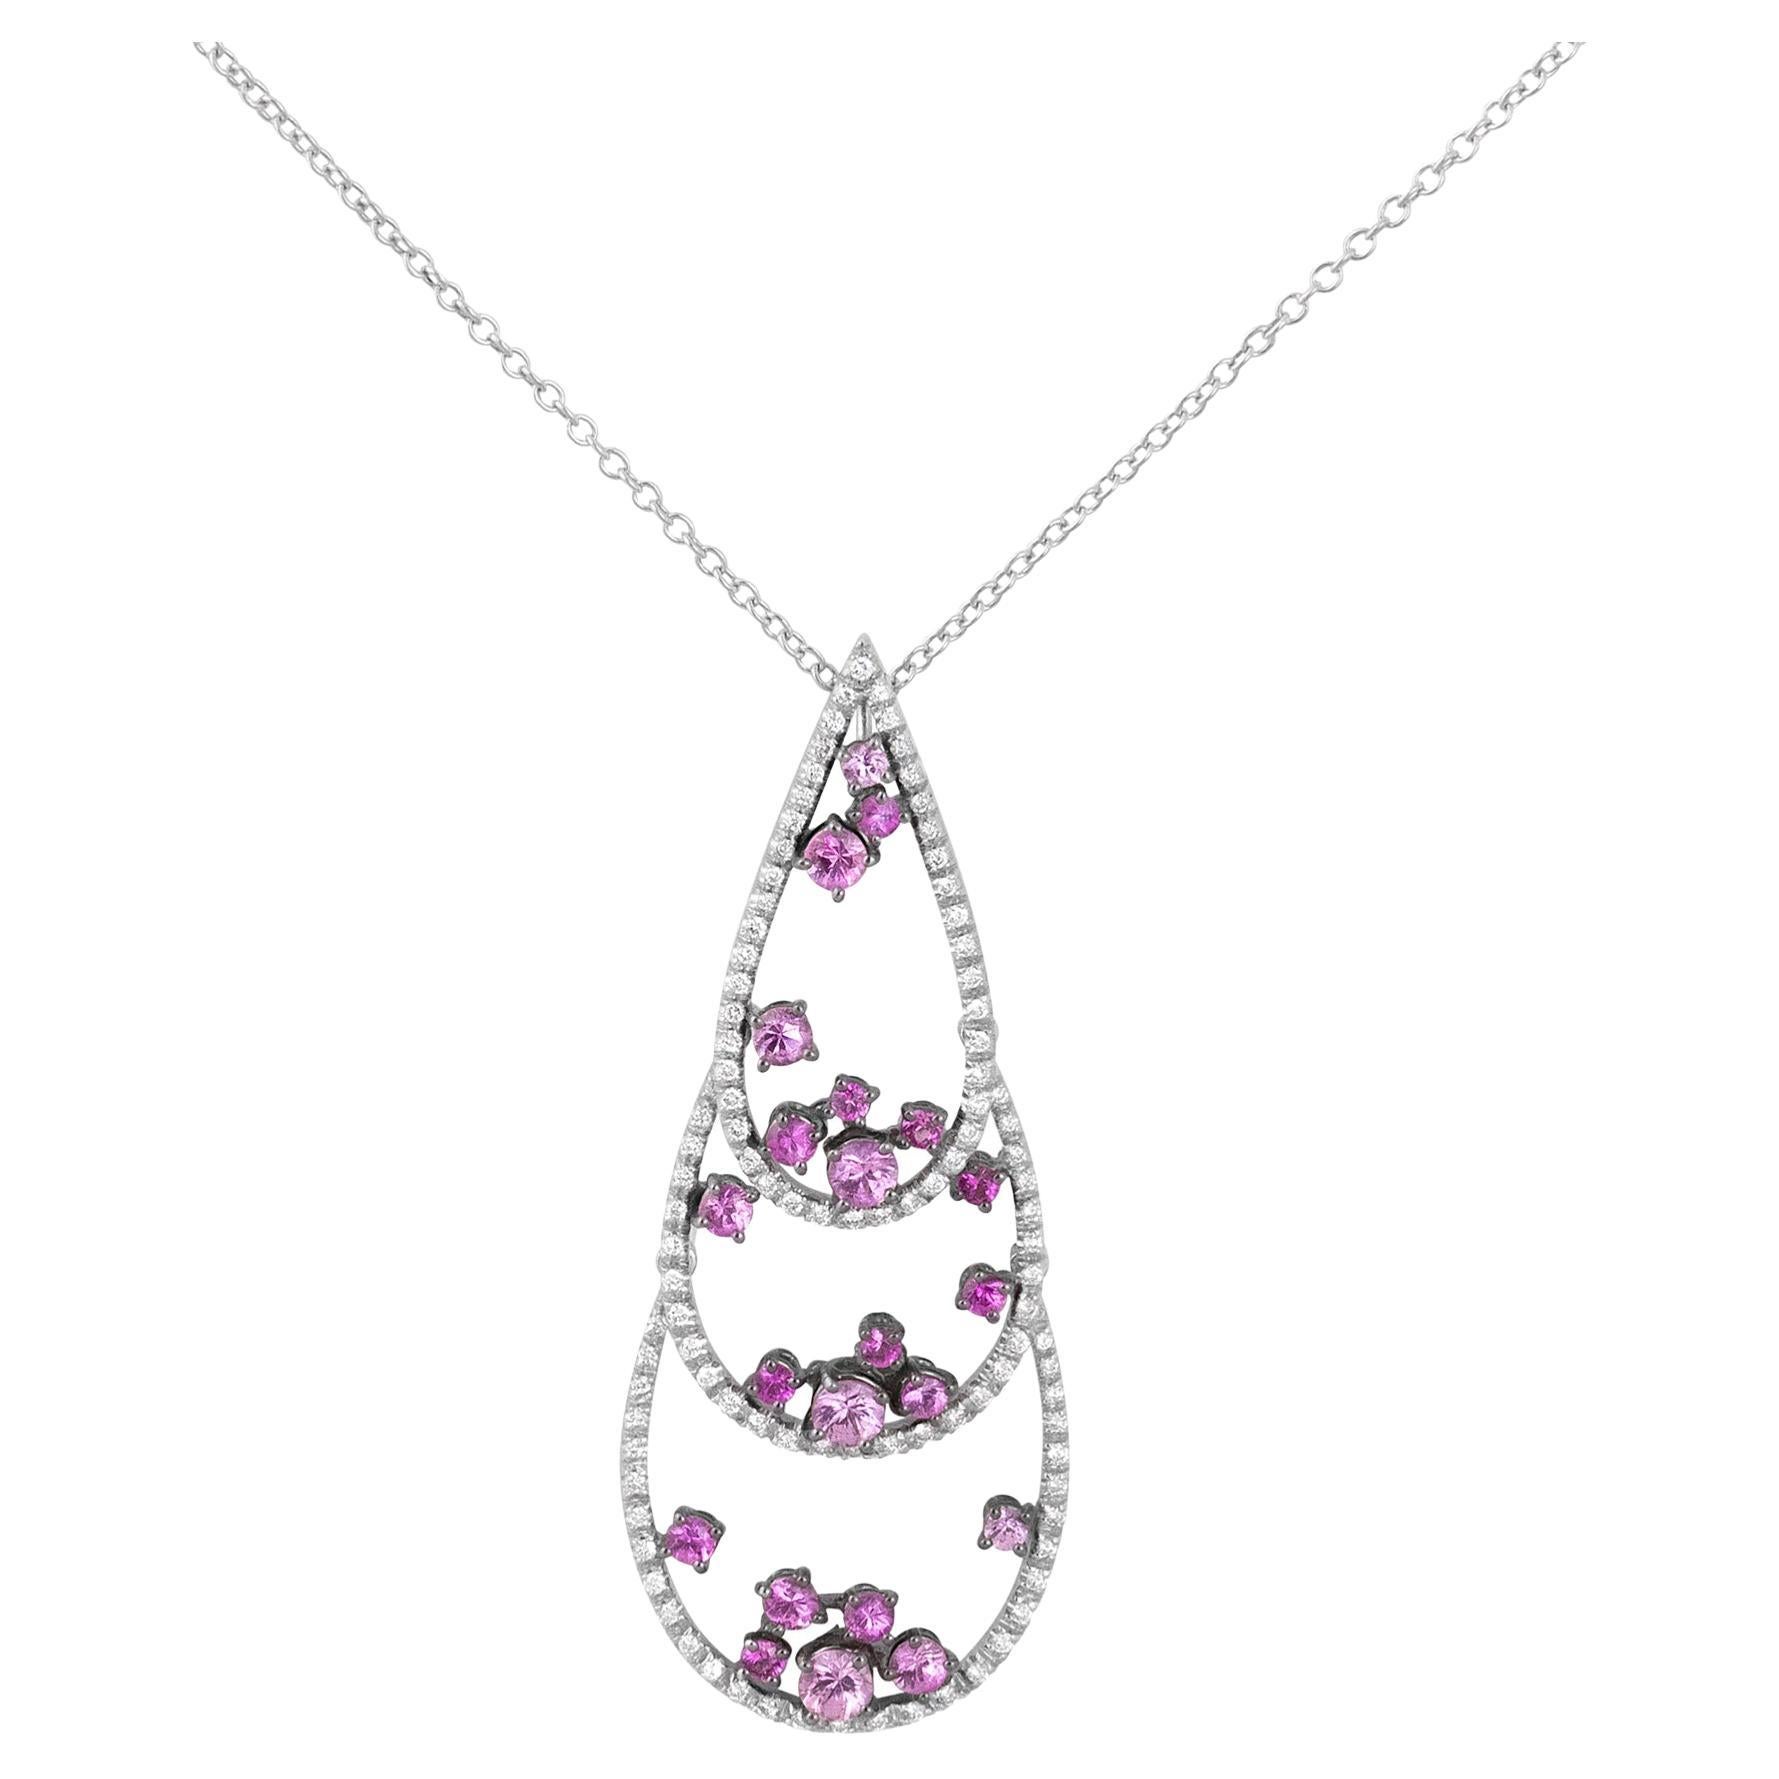 IO SI 18K White Gold Diamond & Pink Sapphire Necklace For Sale